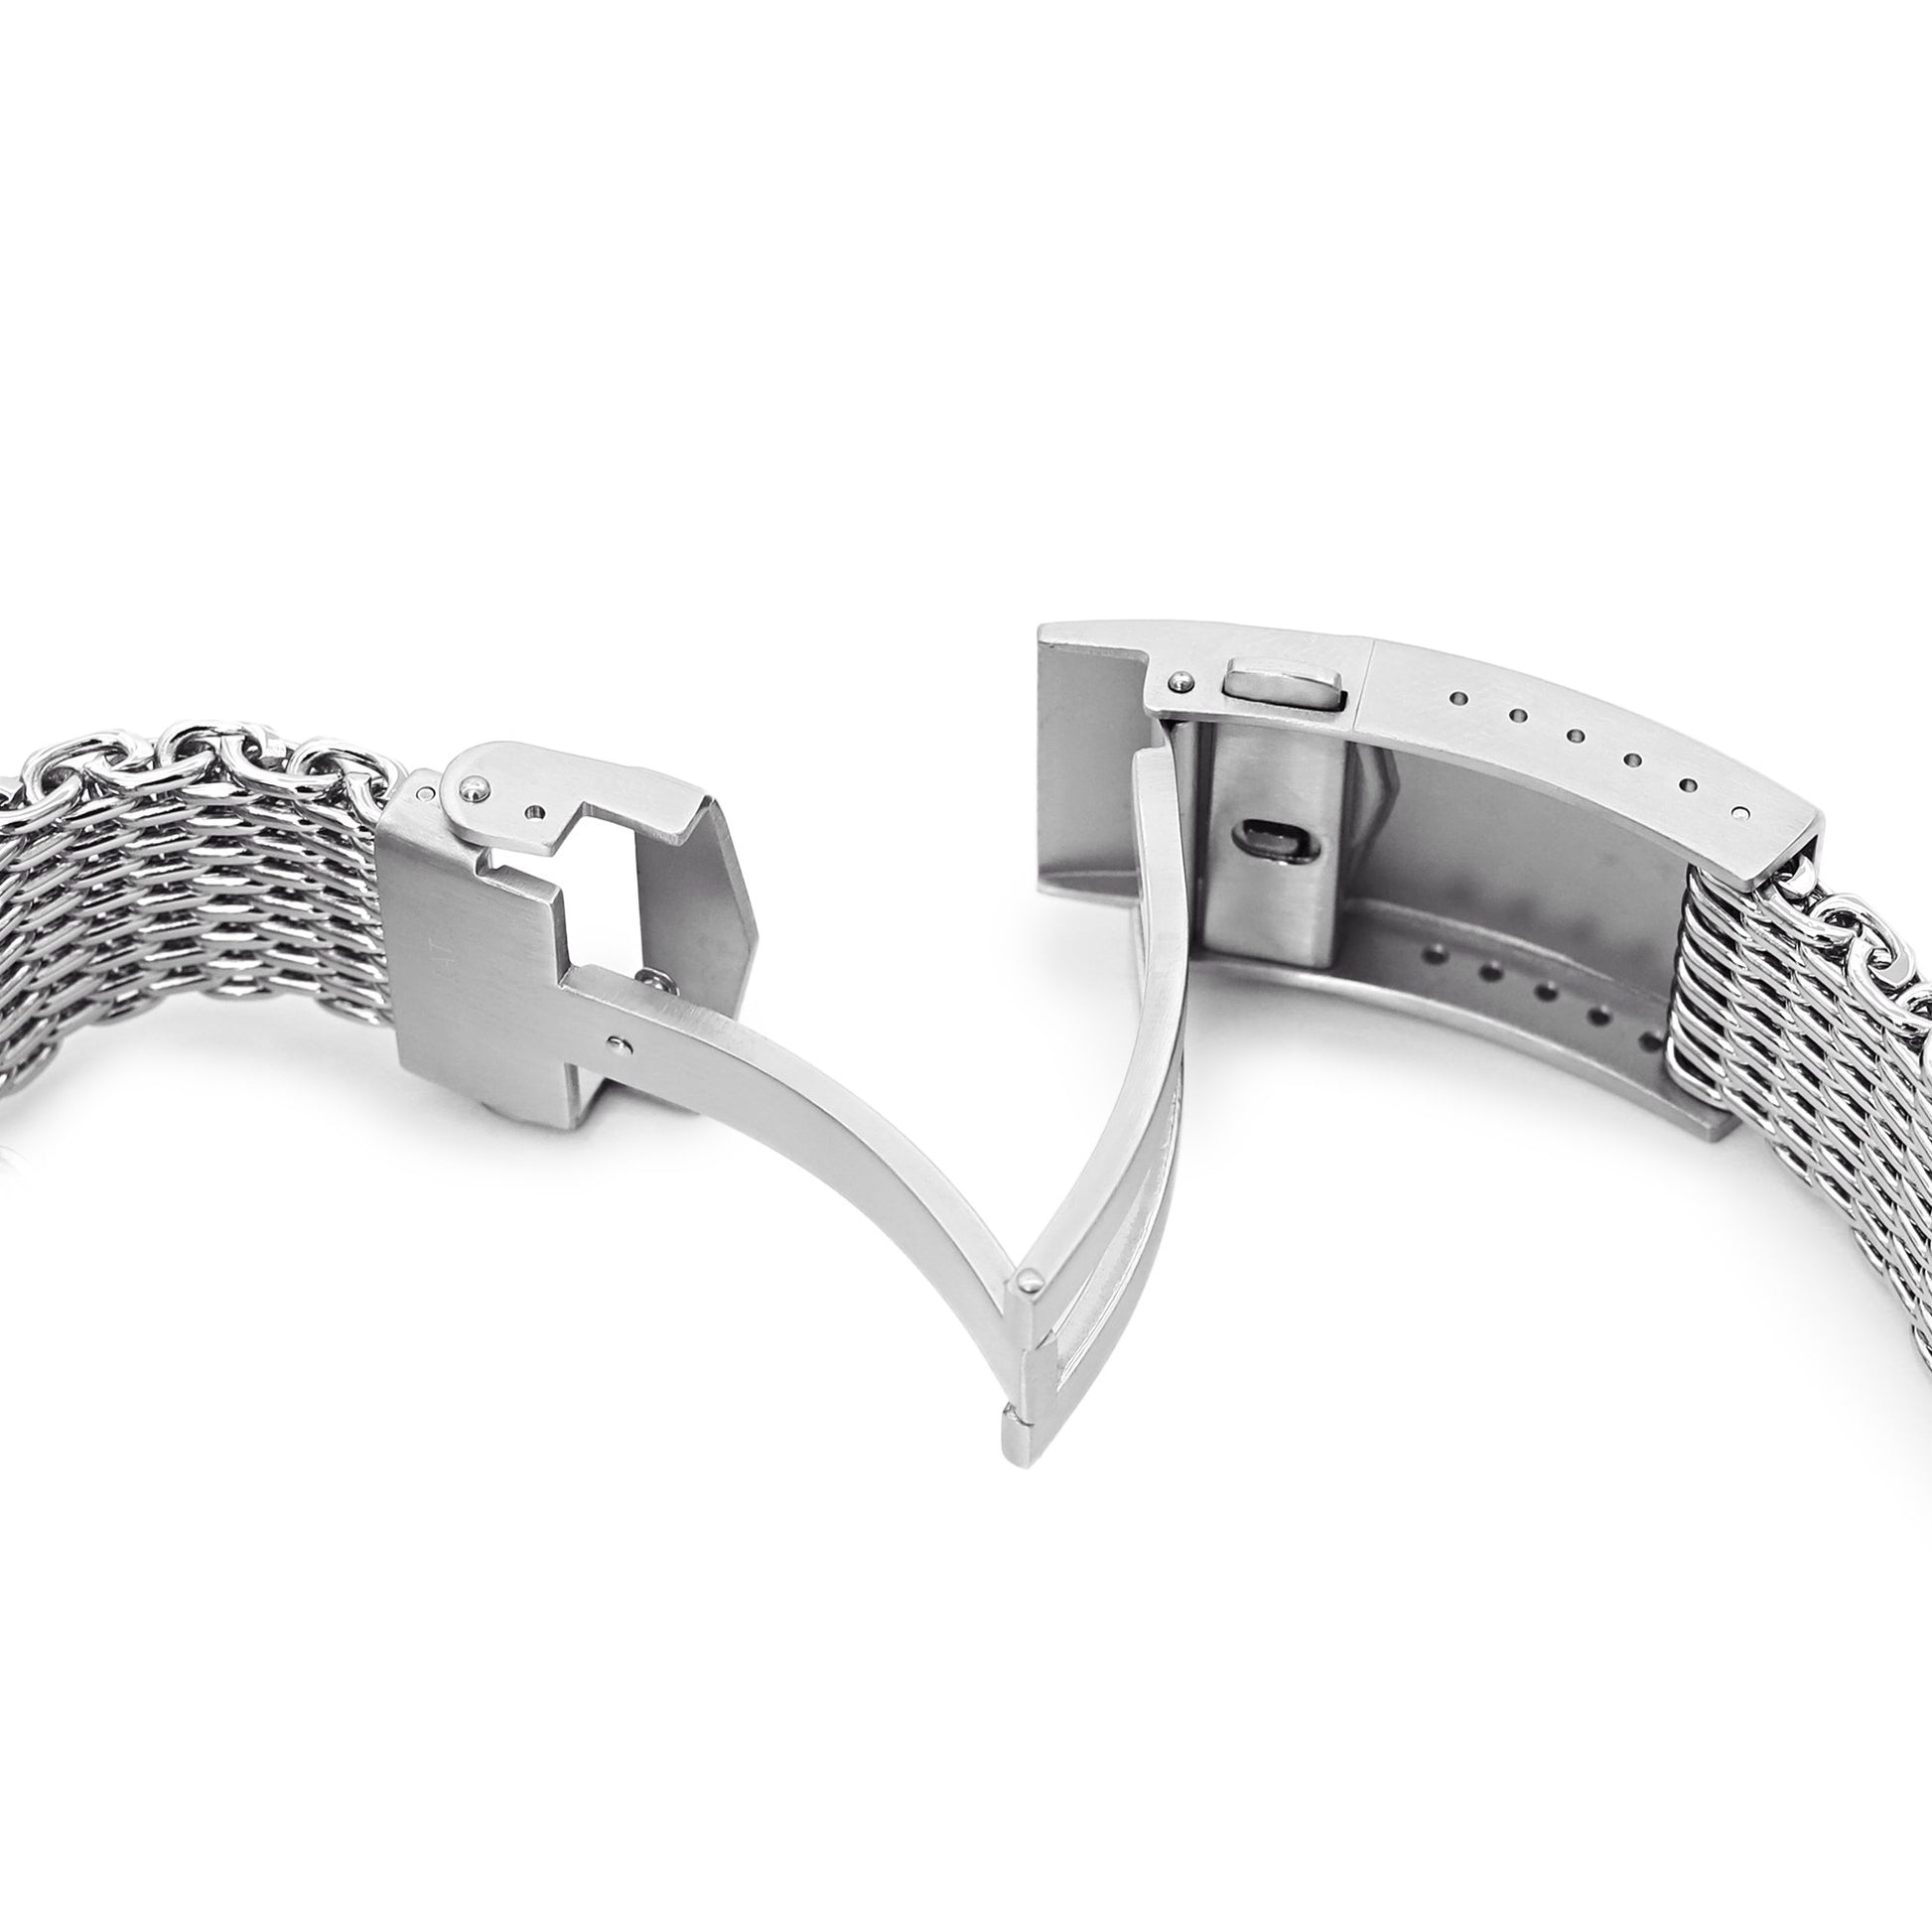 20mm Polished Tapered Winghead "SHARK" Mesh watch band, V-Clasp